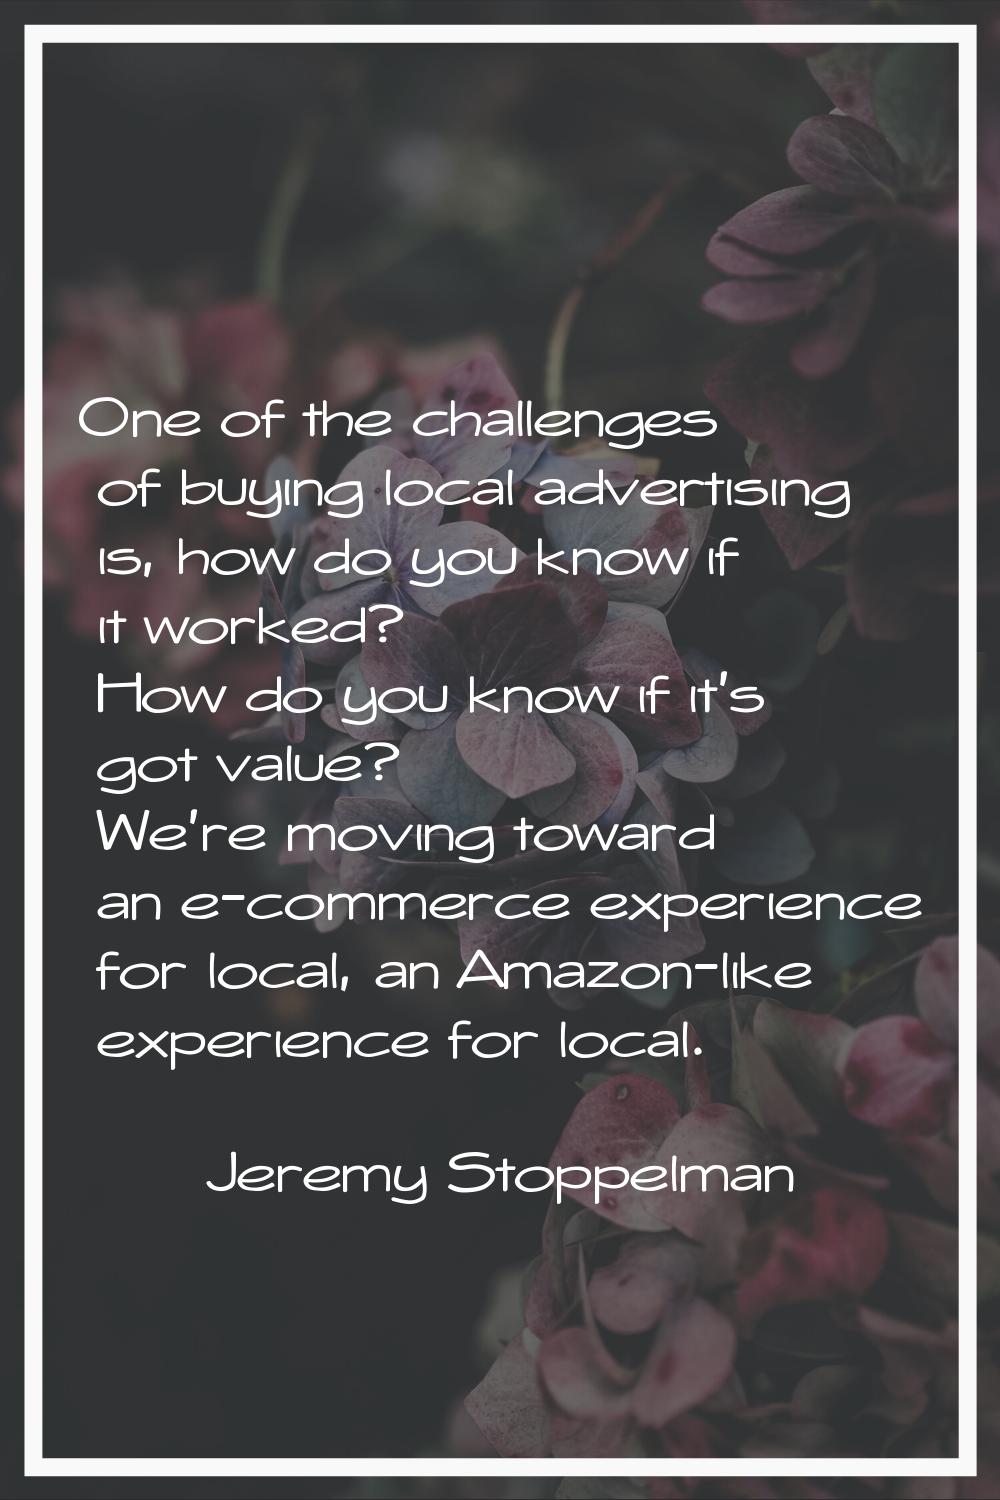 One of the challenges of buying local advertising is, how do you know if it worked? How do you know